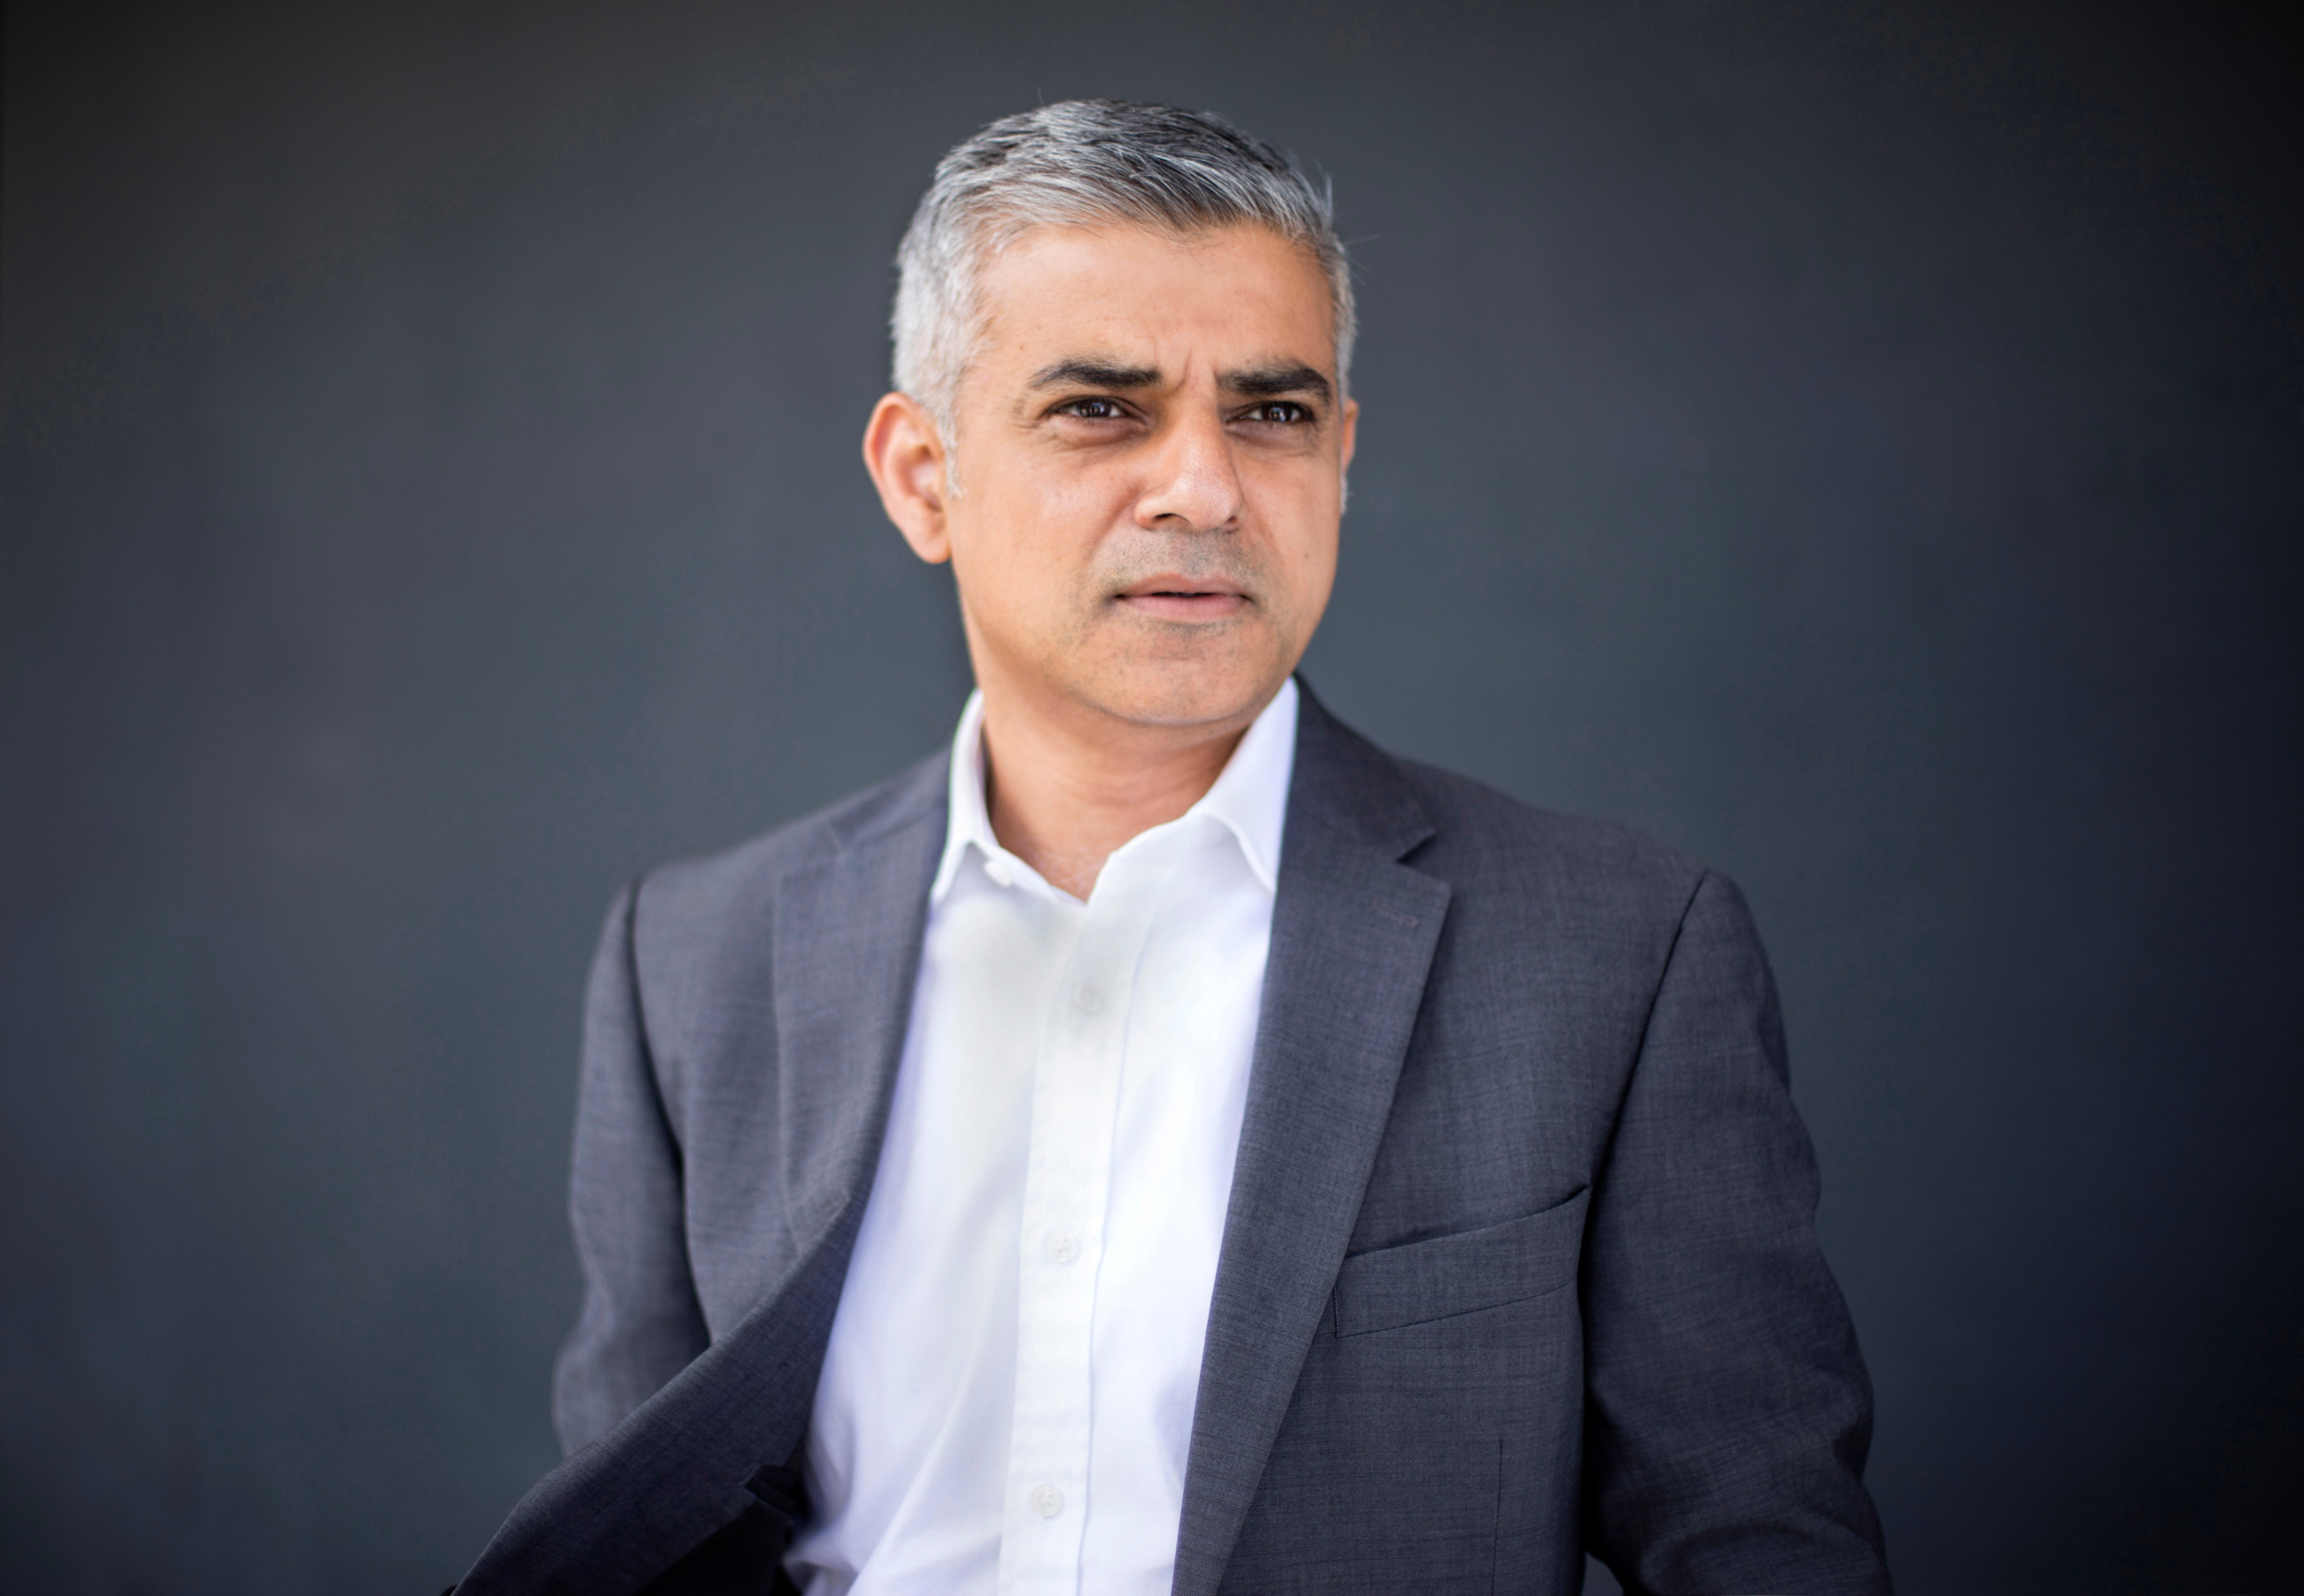 Sadiq Khan, London's newly elected mayor, poses for a portrait in London on May 8, 2016 (Laura Pannack for TIME)